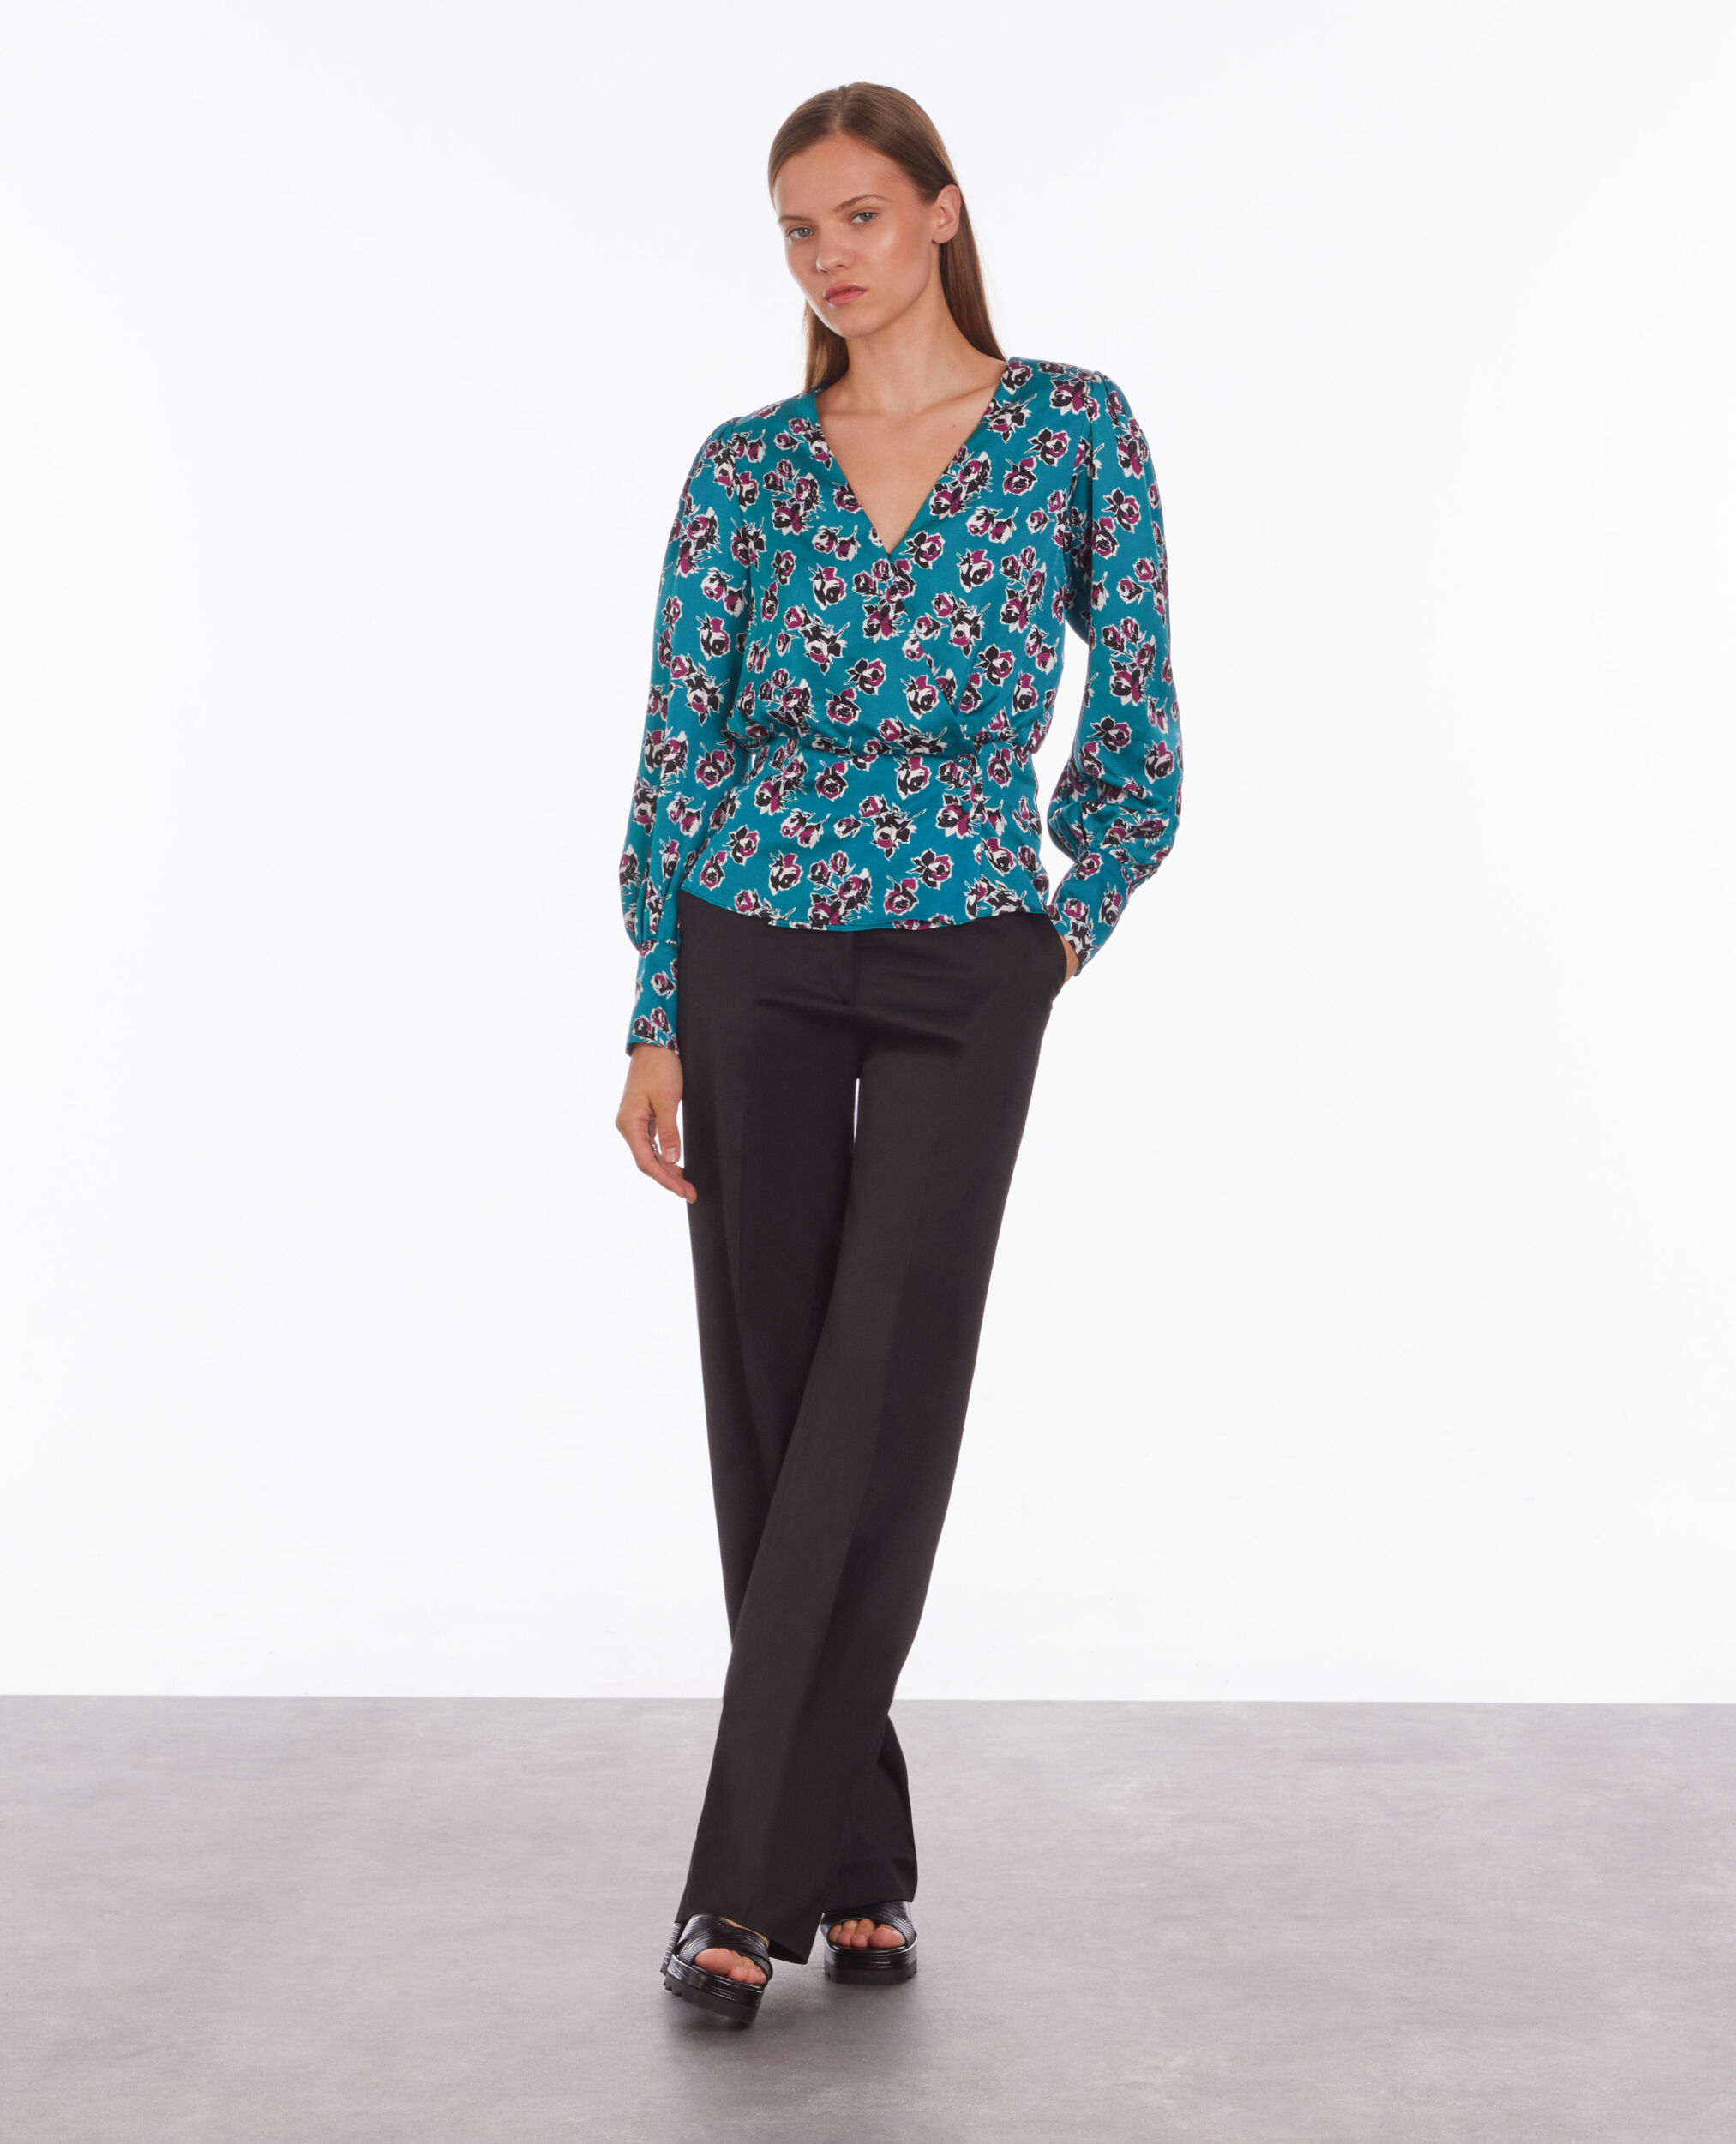 Blouses & Shirts for Women | The Kooples - US